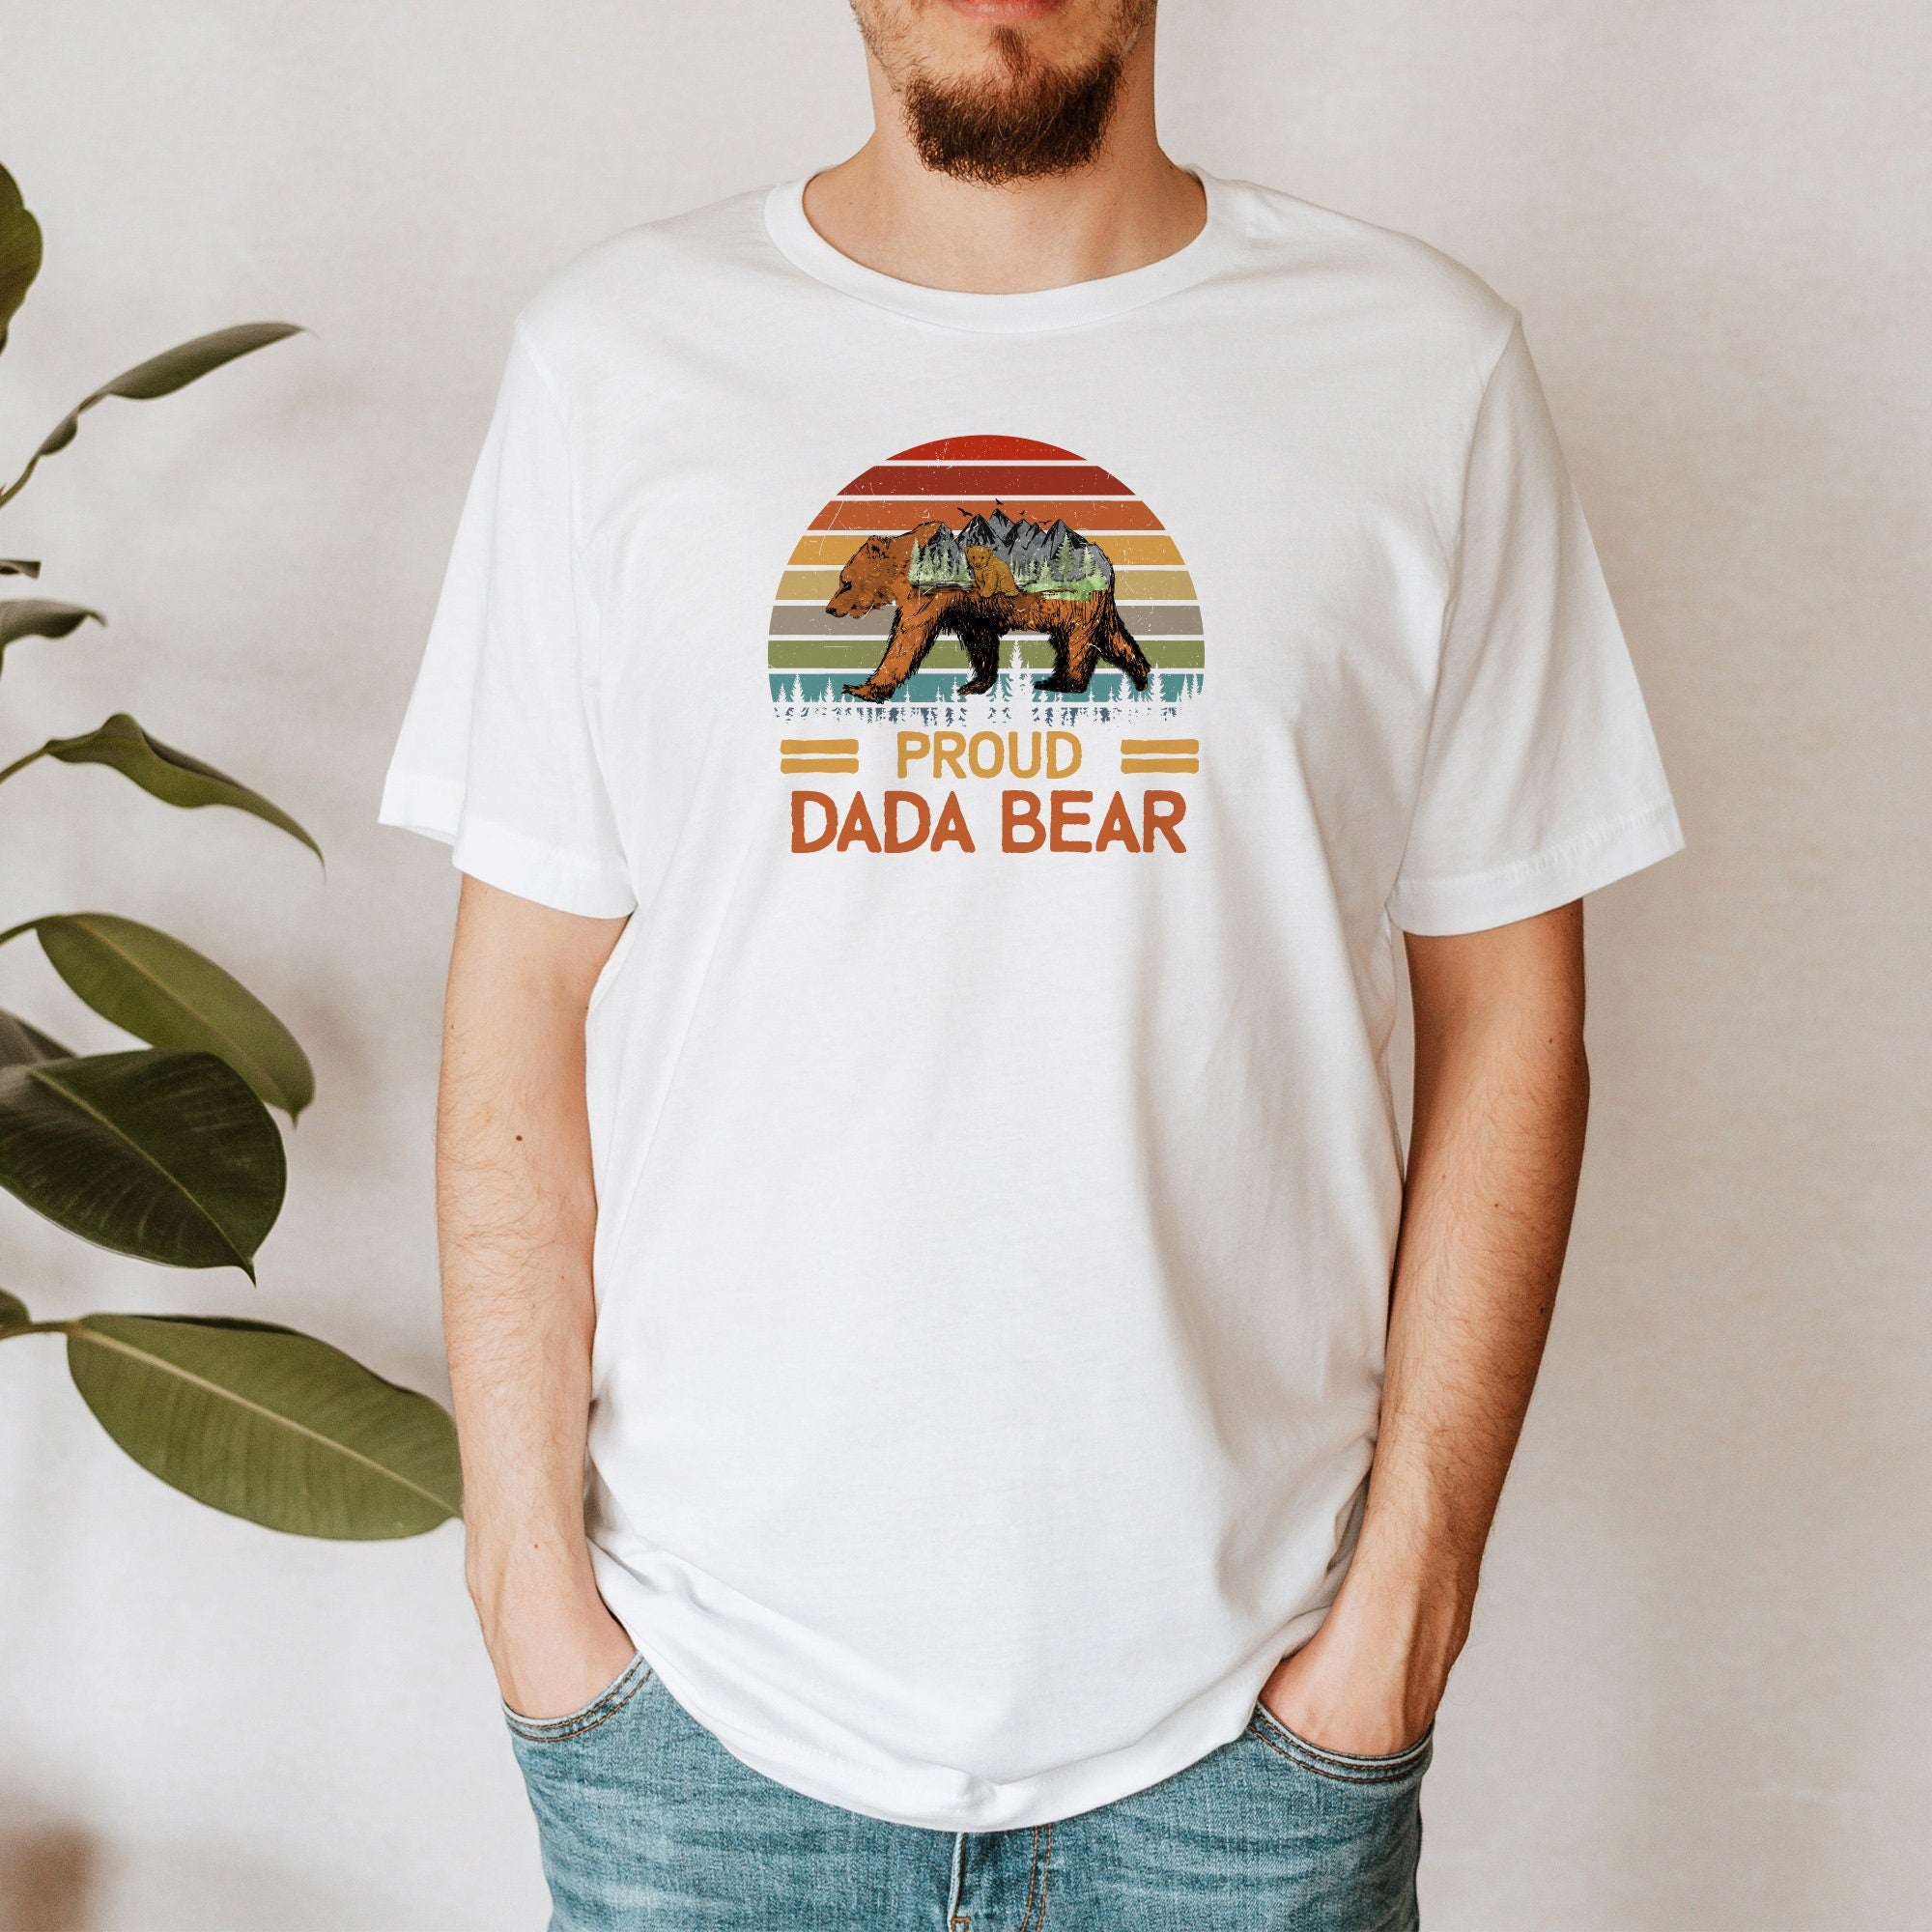 Proud Dada Bear T-Shirt, Father's Day Gift, First Father'S Day Present, Dad & Son Or Daughter